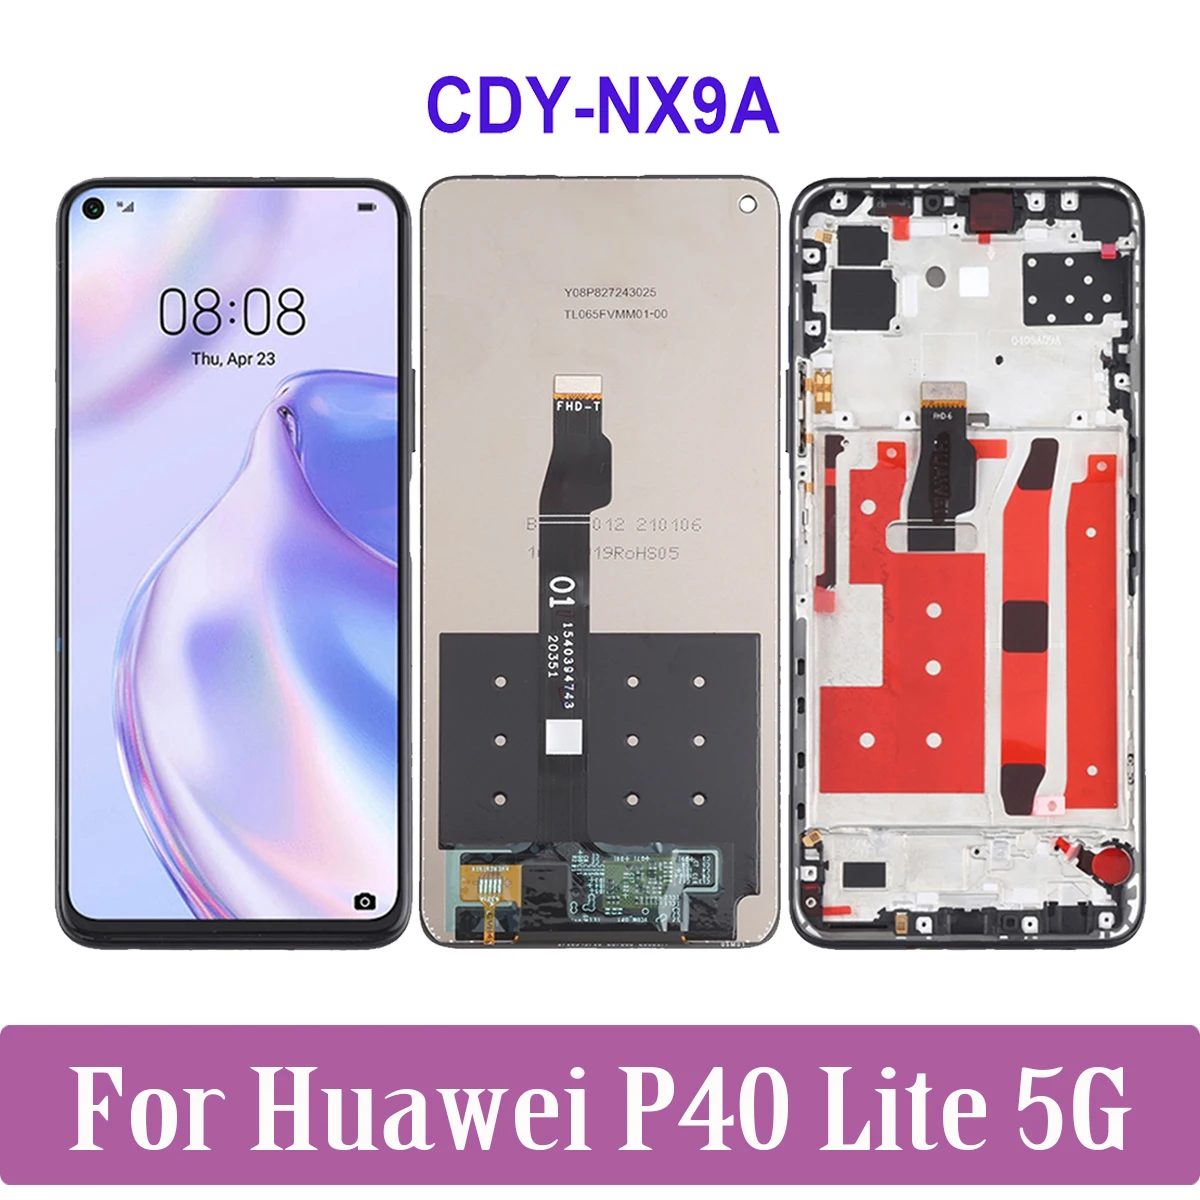 

6.5" Original For Huawei P40 Lite 5G CDY-NX9A LCD Display Touch Screen Digitizer Assembly For Huawei P40Lite 5G Display